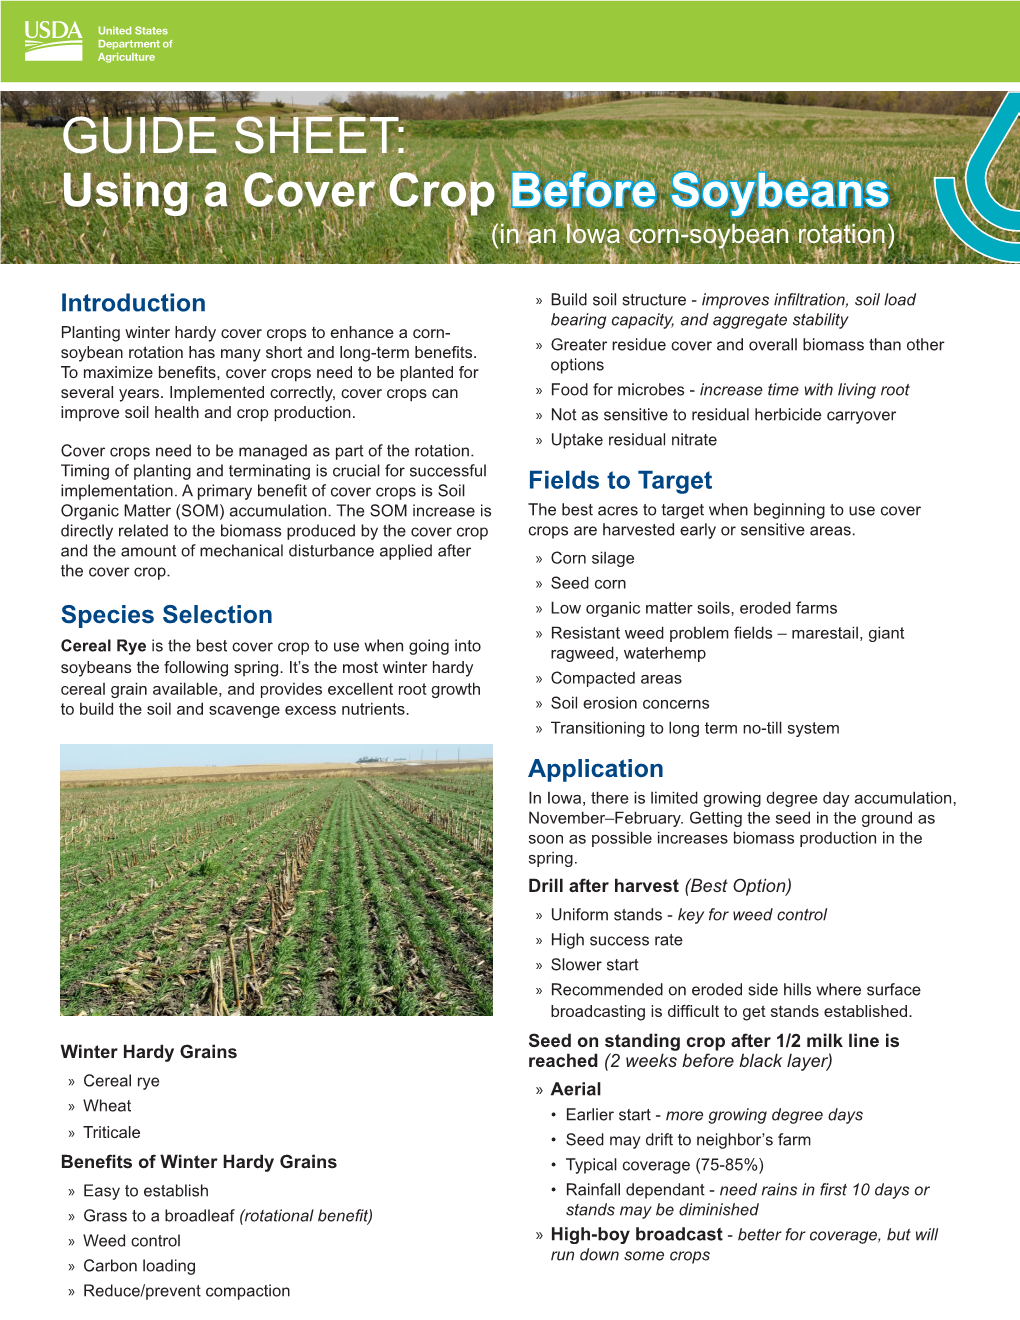 GUIDE SHEET: Using a Cover Crop Before Soybeans (In an Iowa Corn-Soybean Rotation)